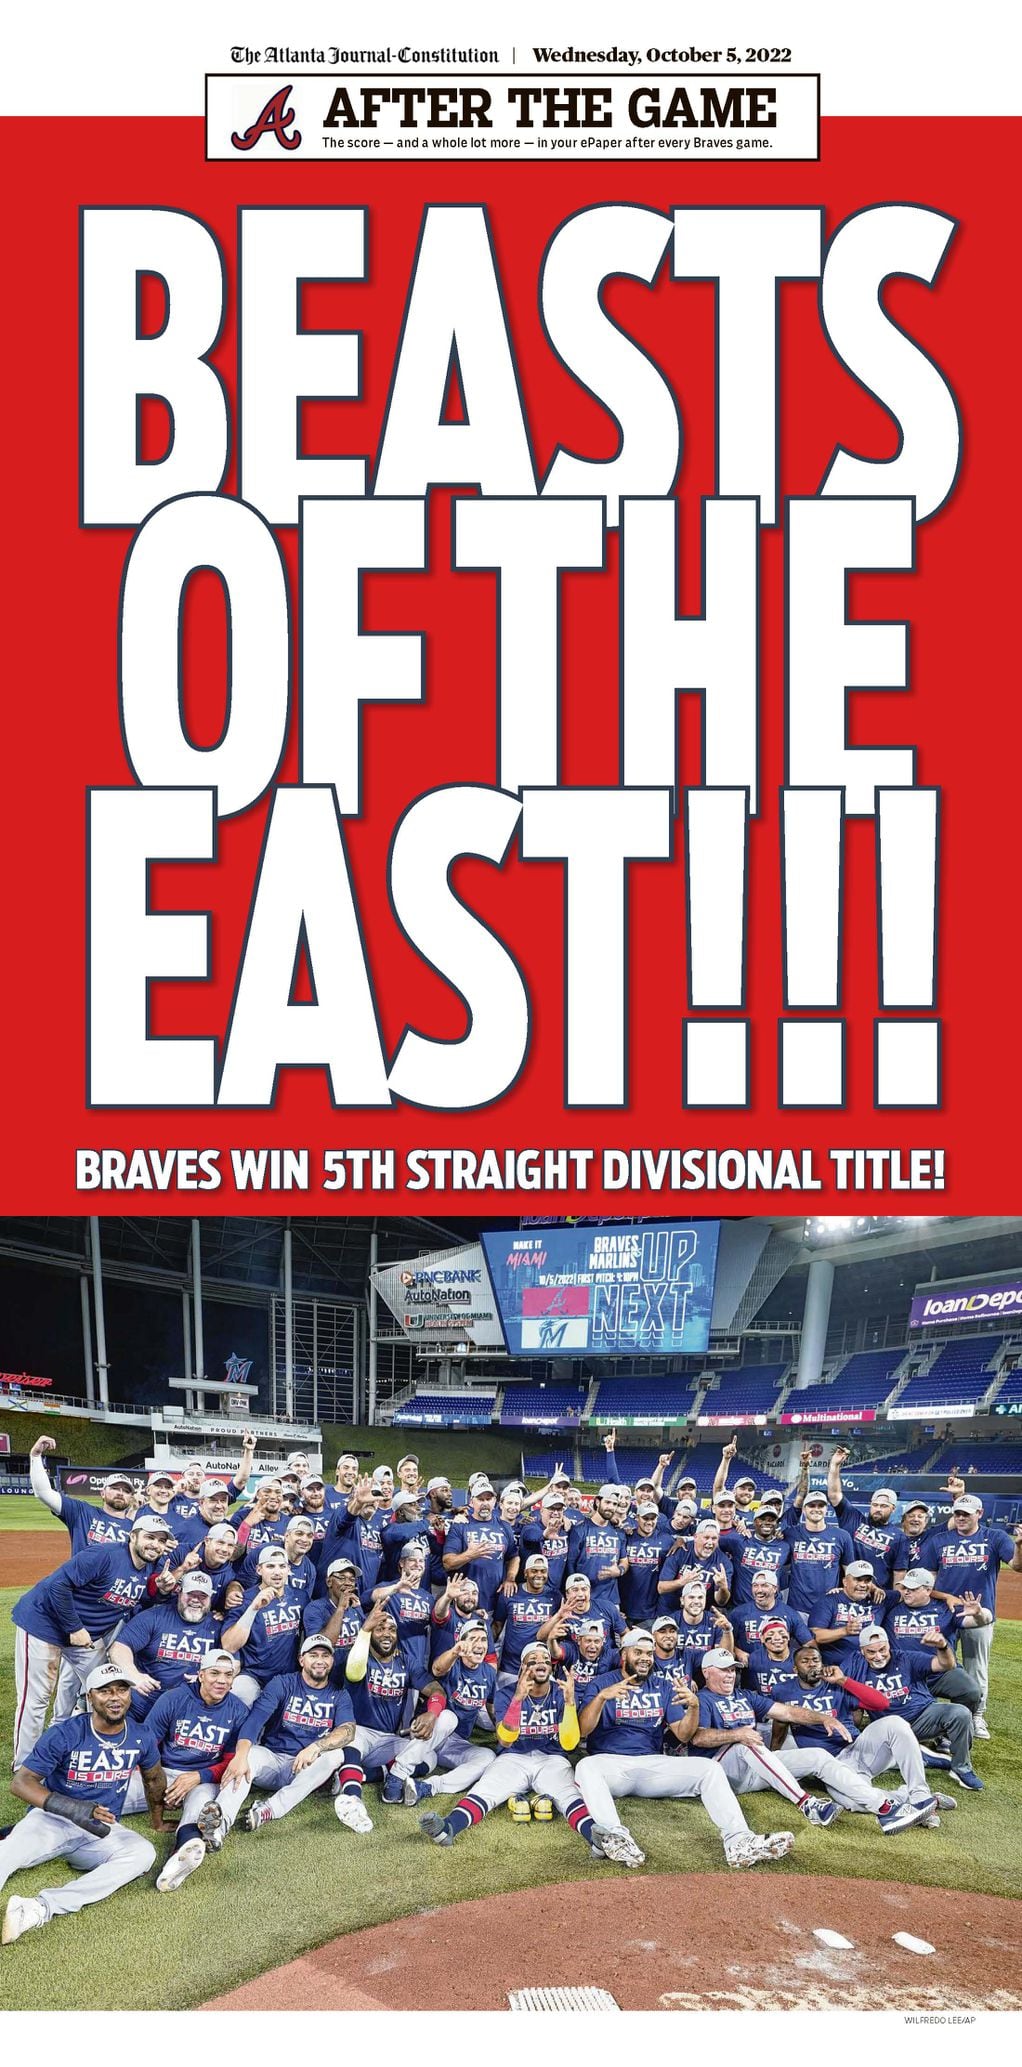 Beasts of the East! — Read about the Braves' repeat victory as NL